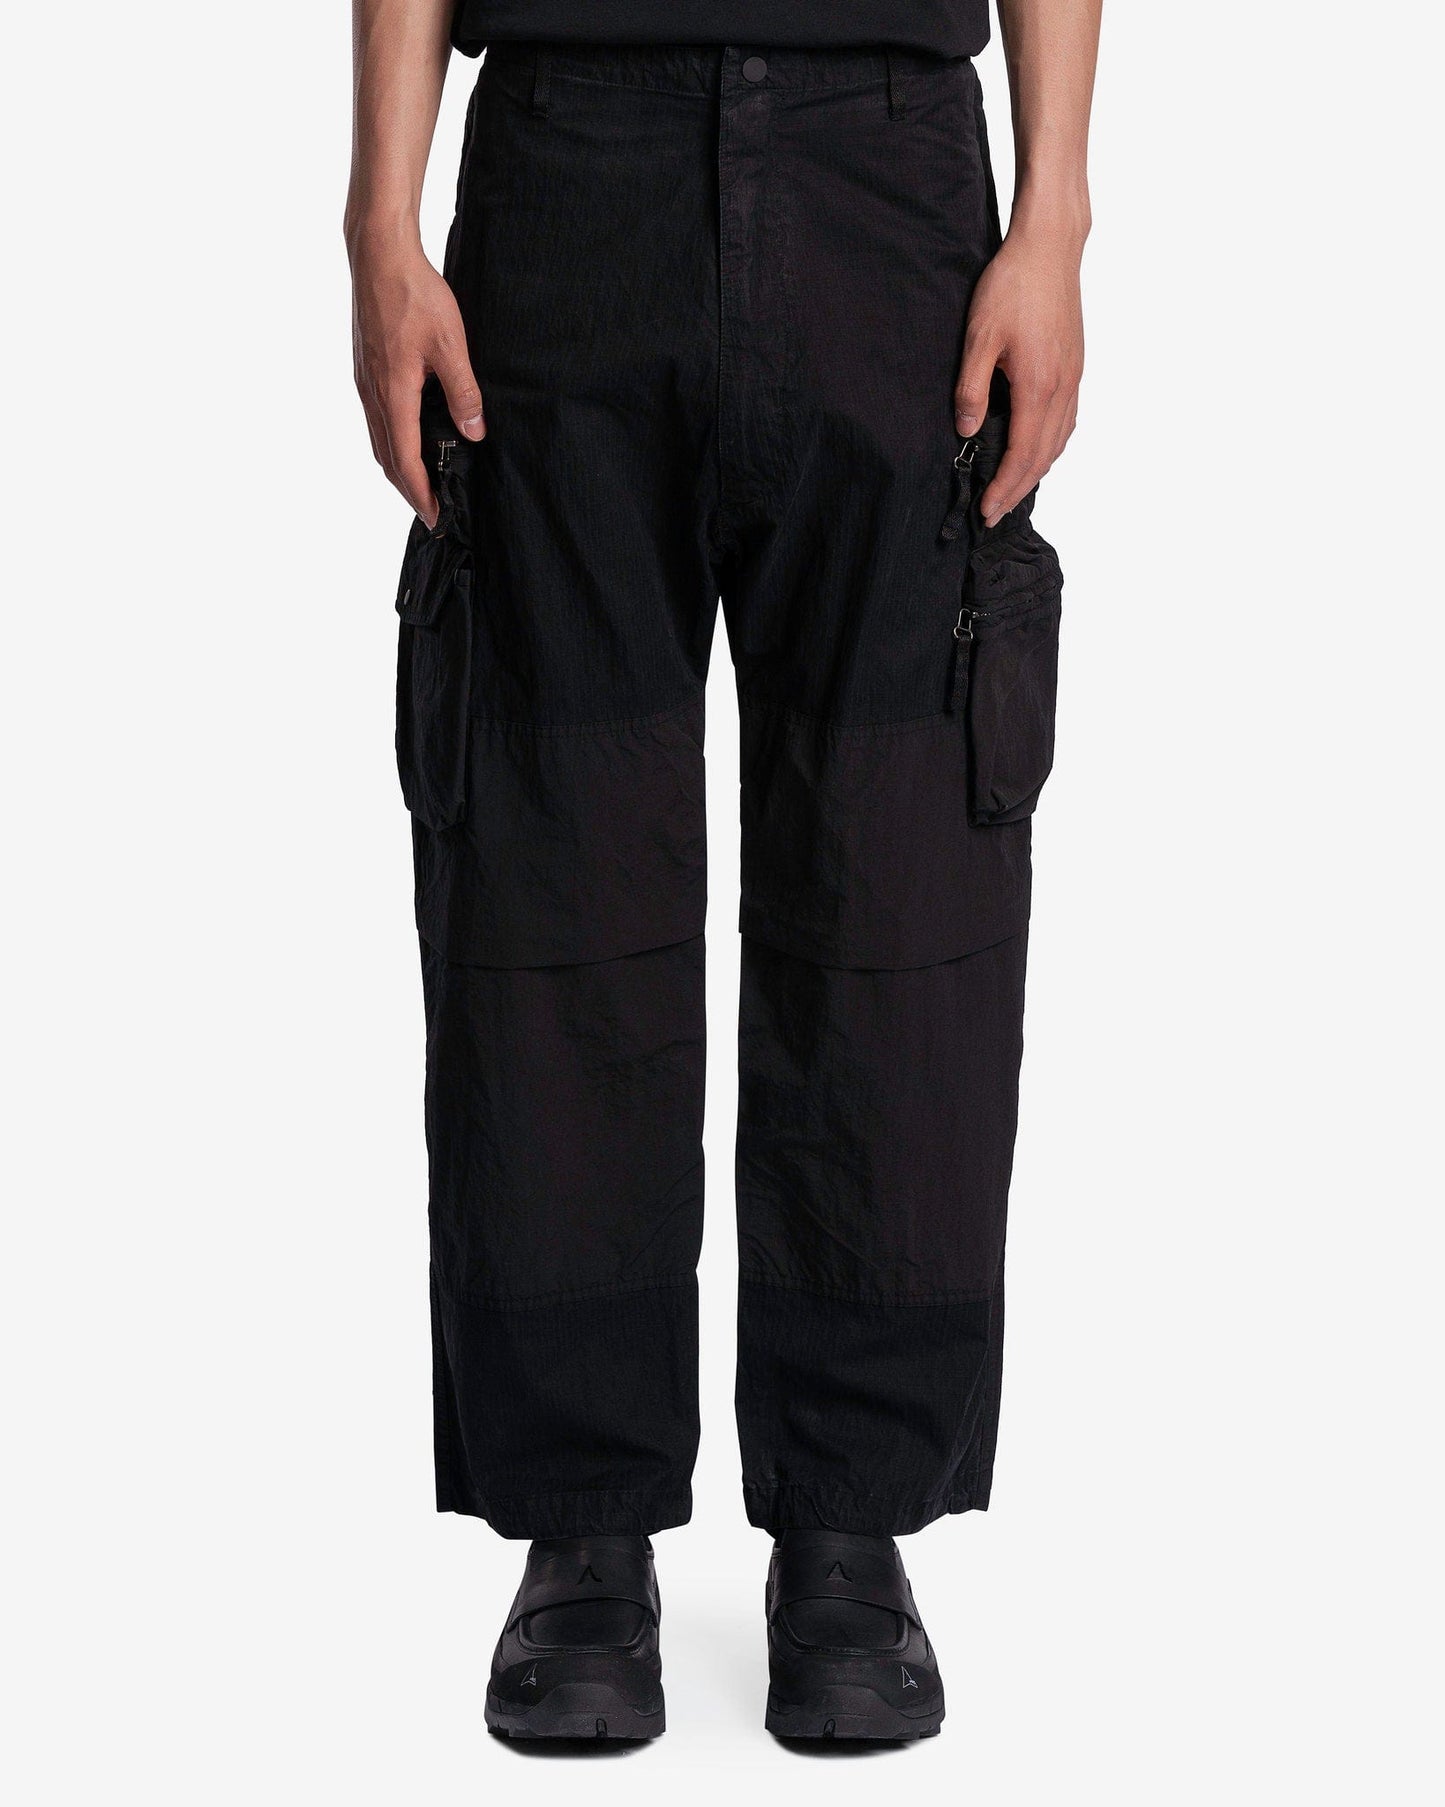 Rise Multipocket Parachute Pants in Ink Black